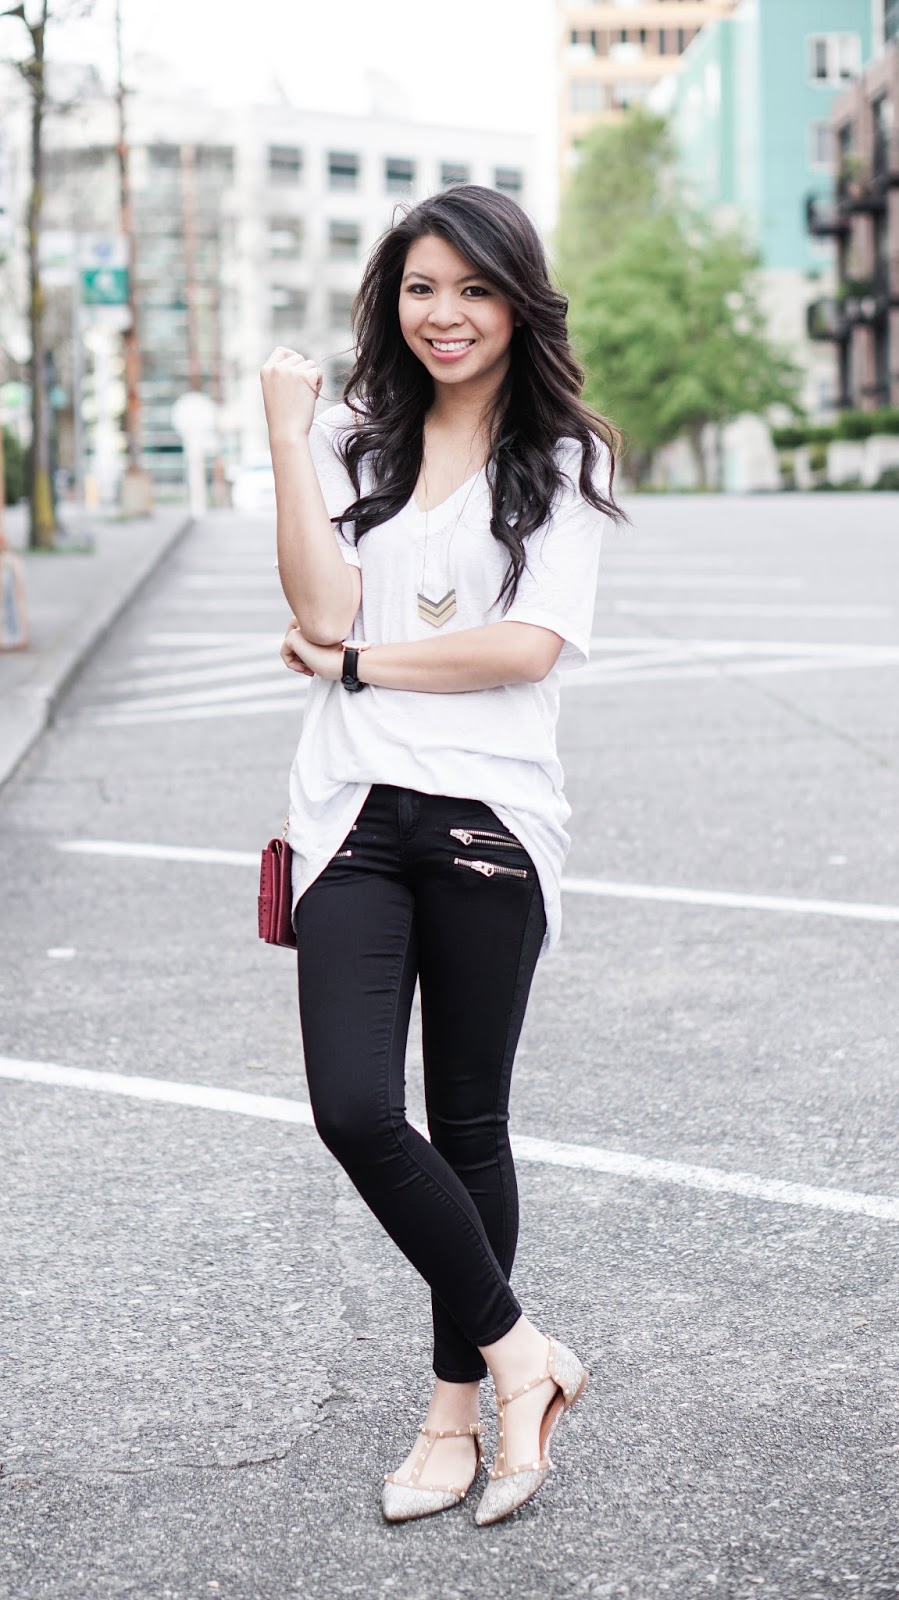 Black & White: Plain Tee and Zippered Jeans | Just a Tina Bit